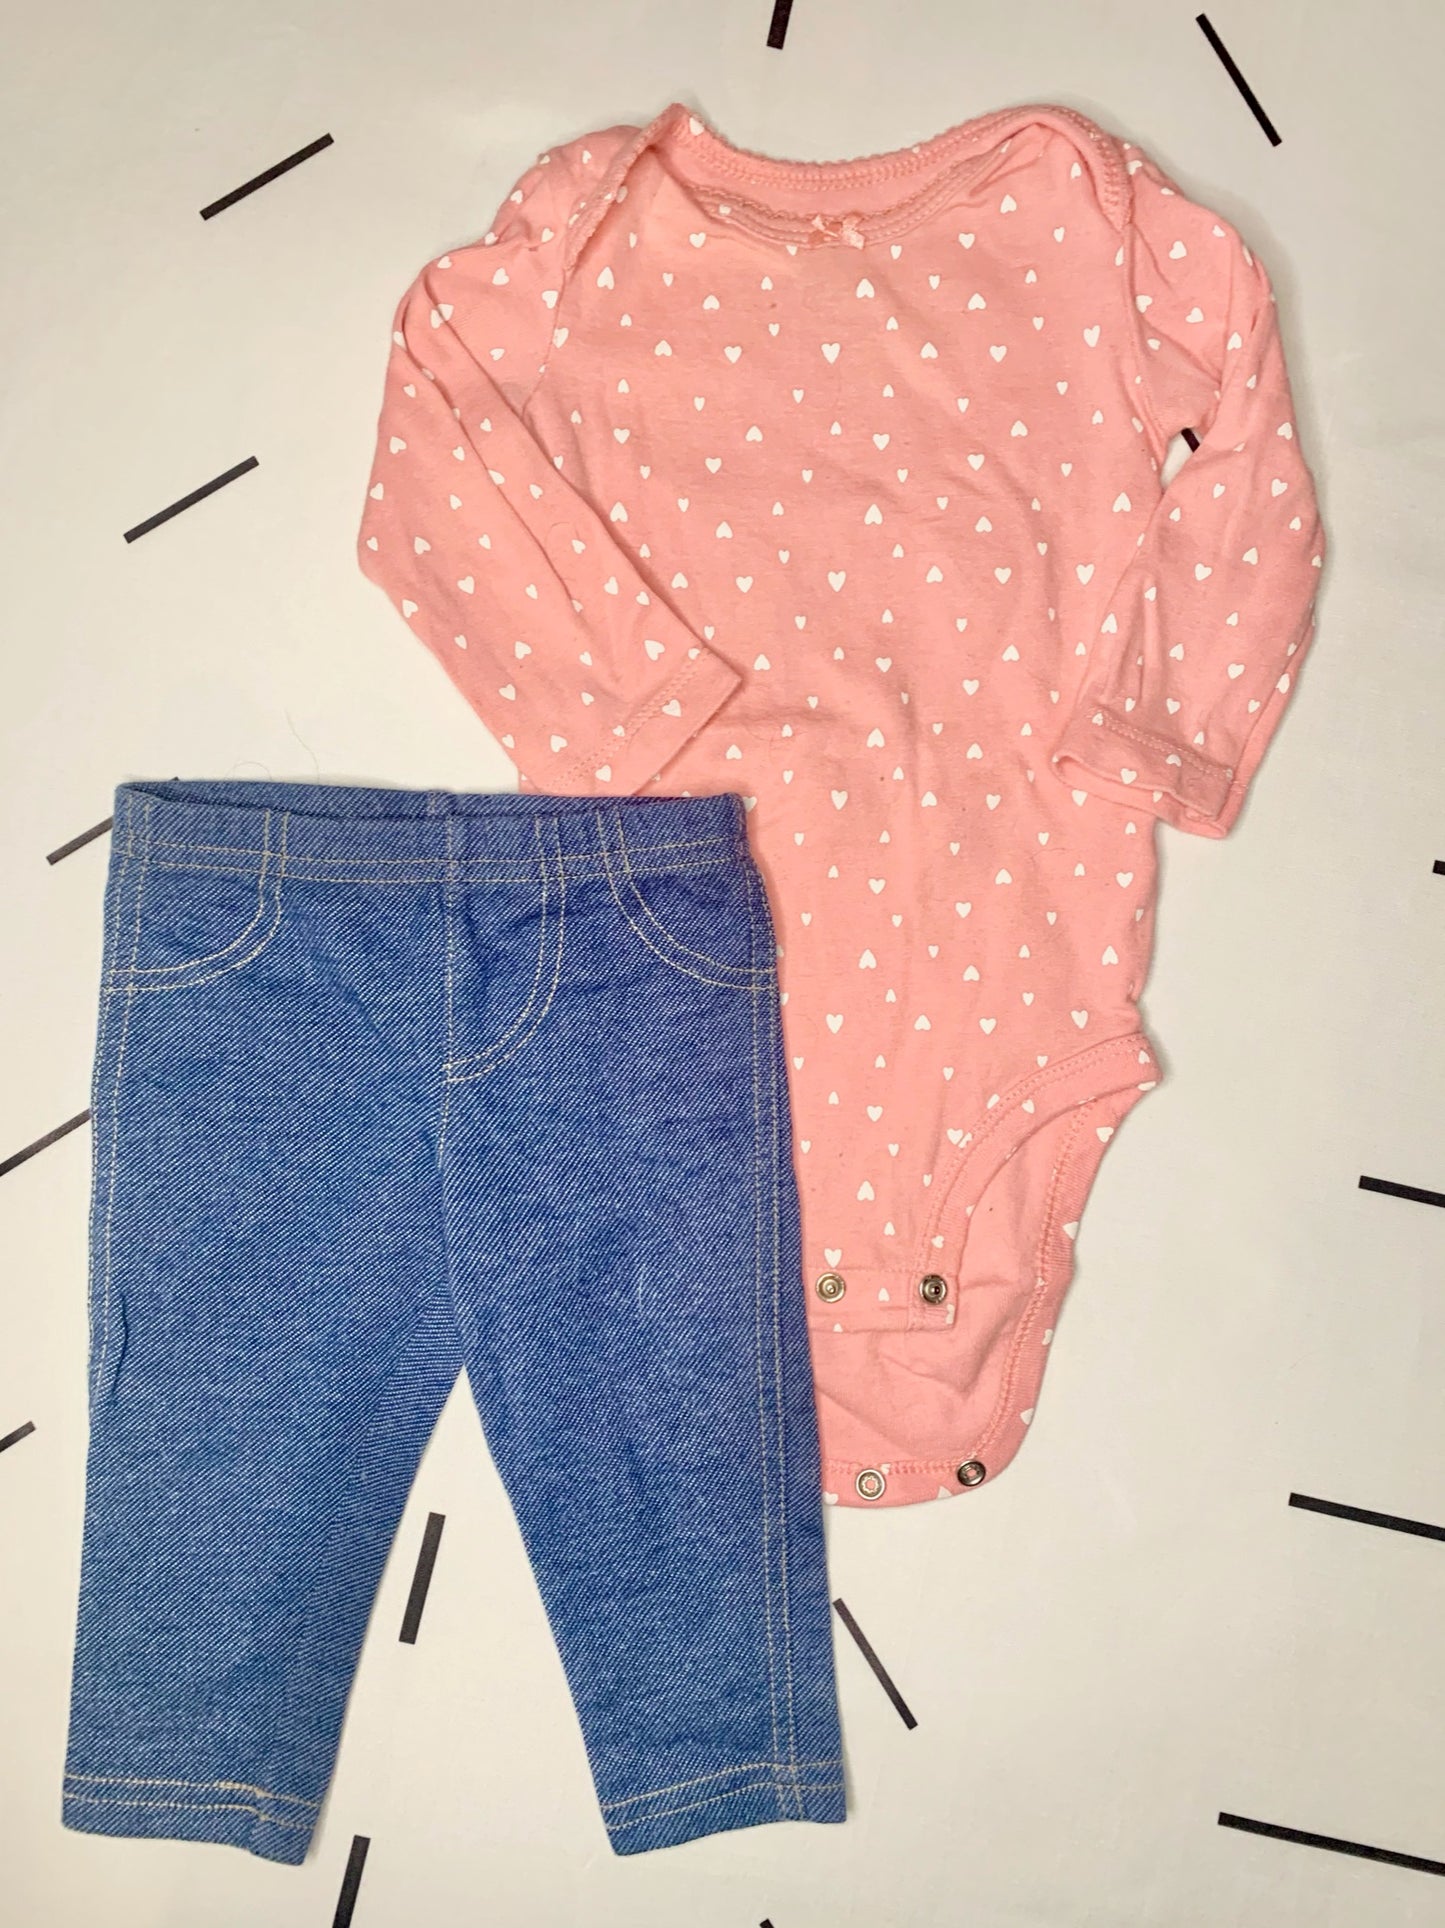 Long Sleeve Pink Onesie and Jegging Outfit Set-6 Months